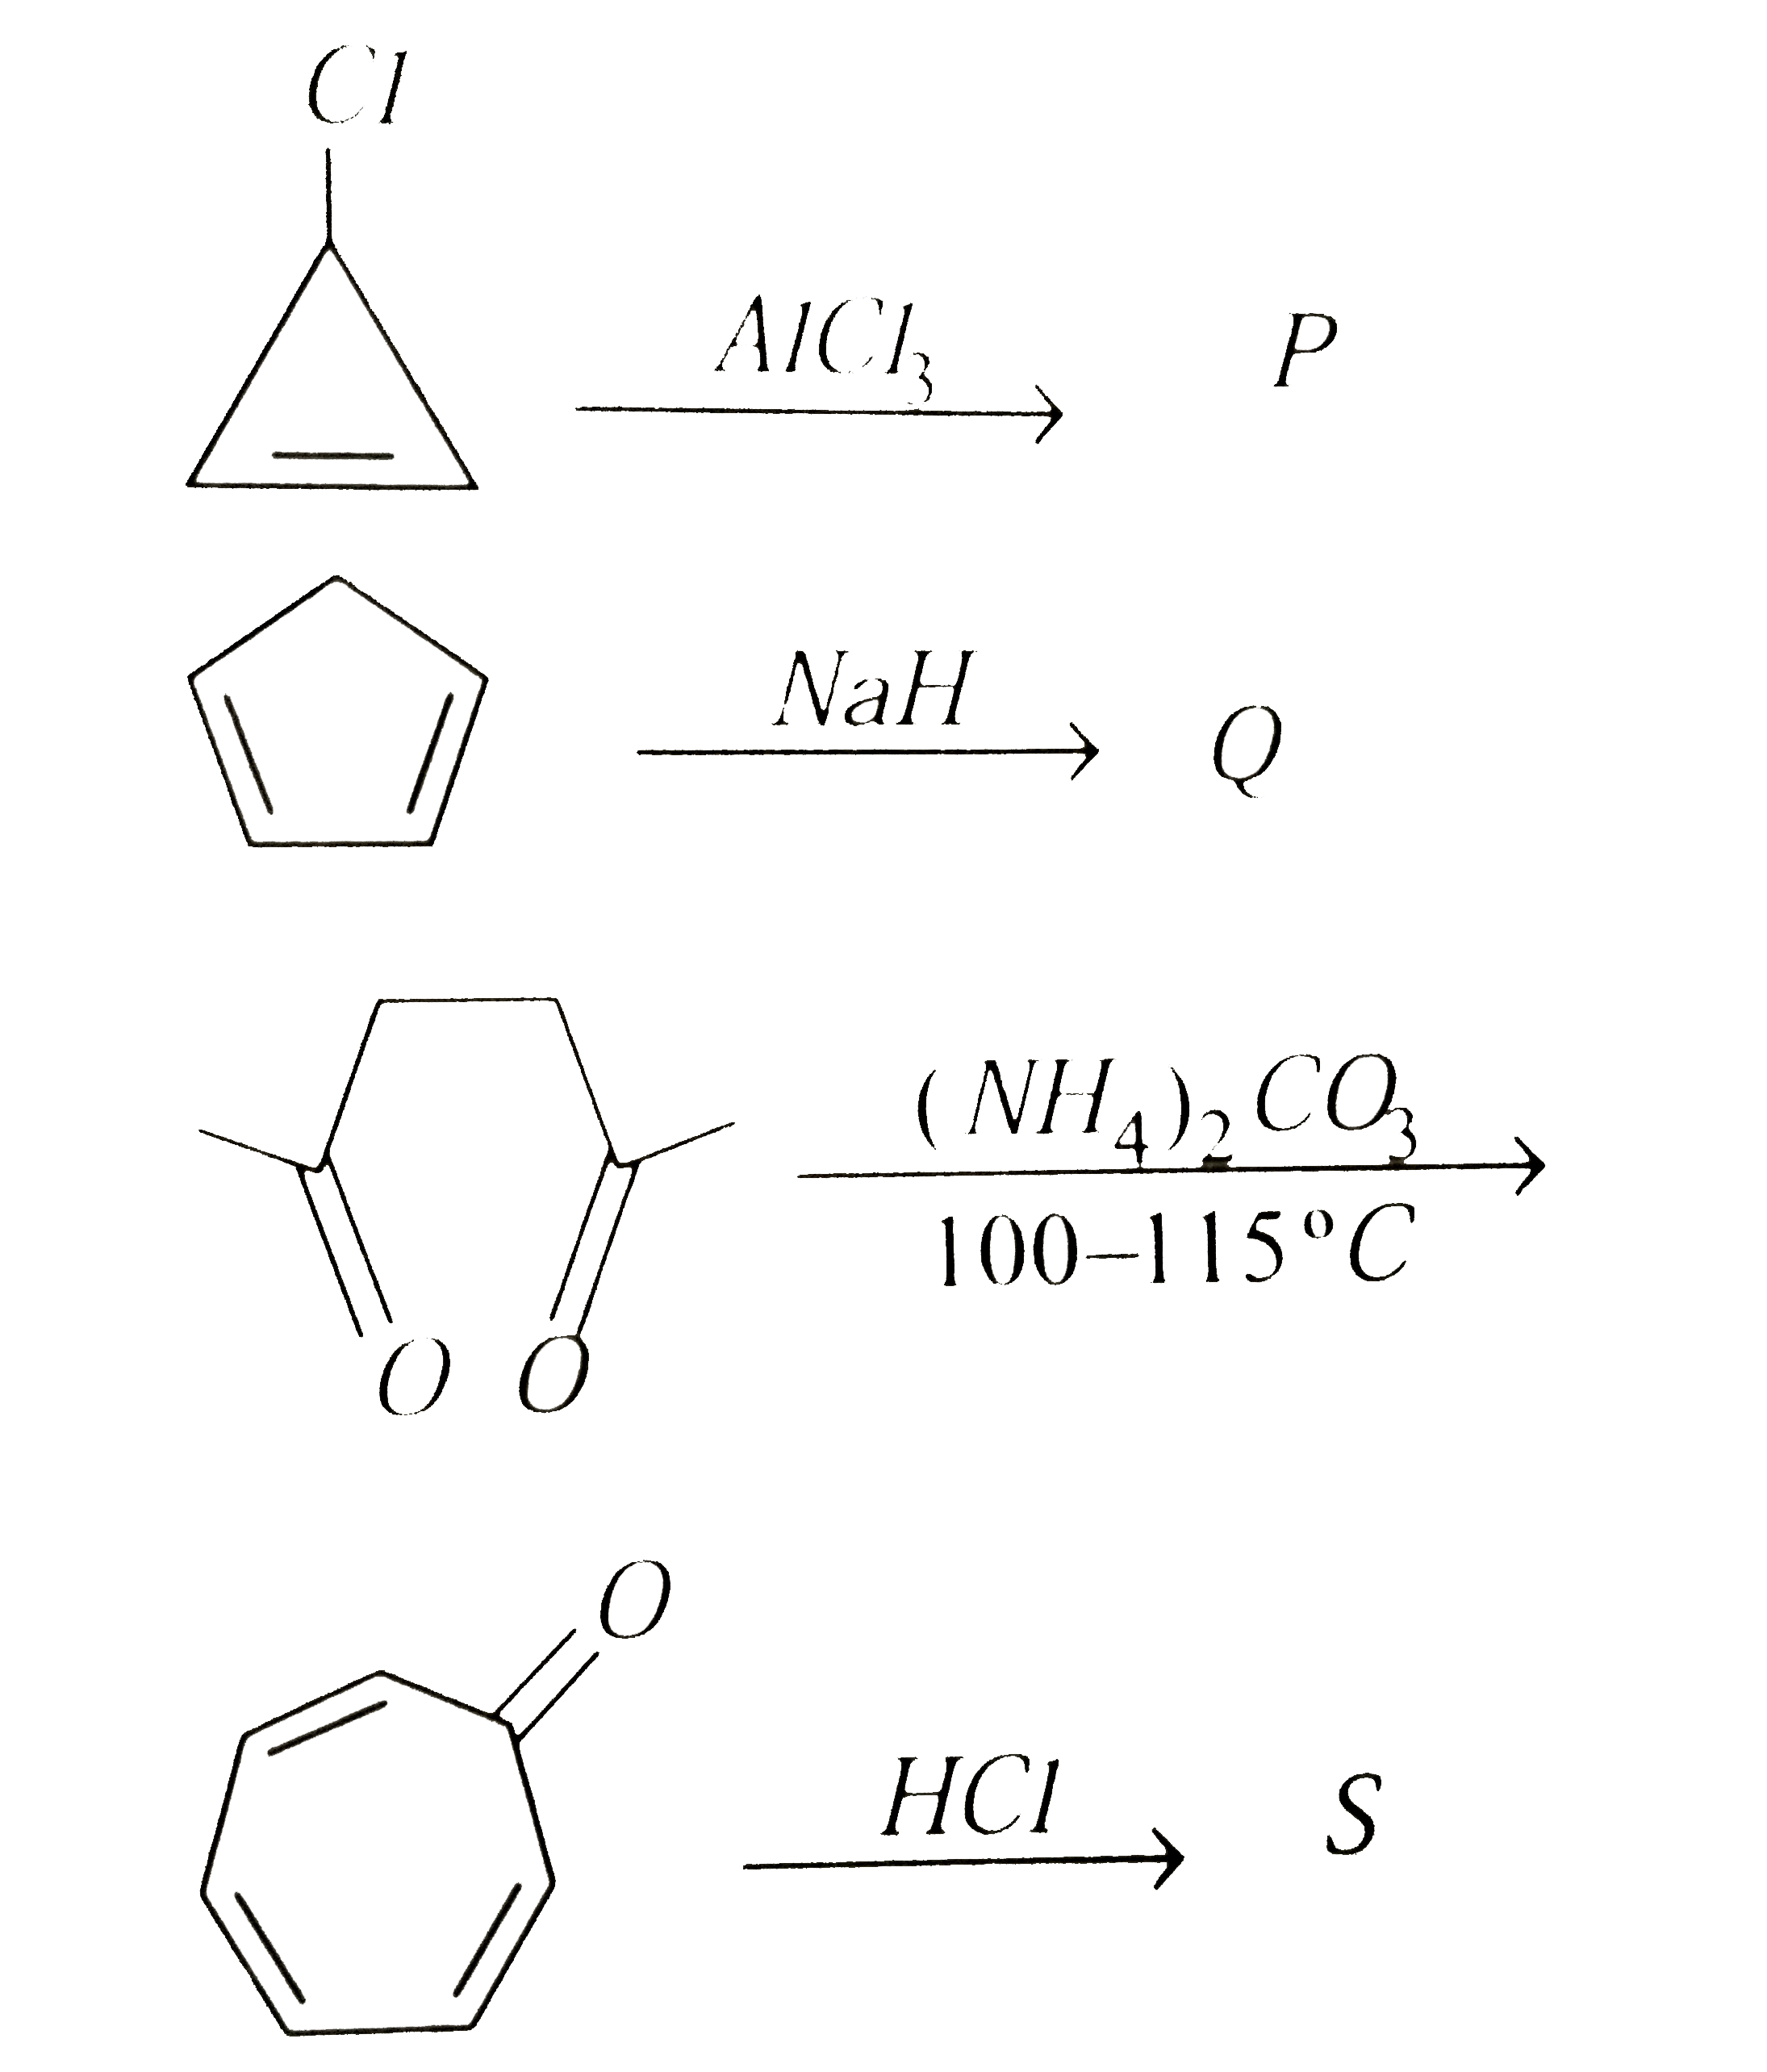 Among P,Q,R and S , the aromtic compound(s) is /are